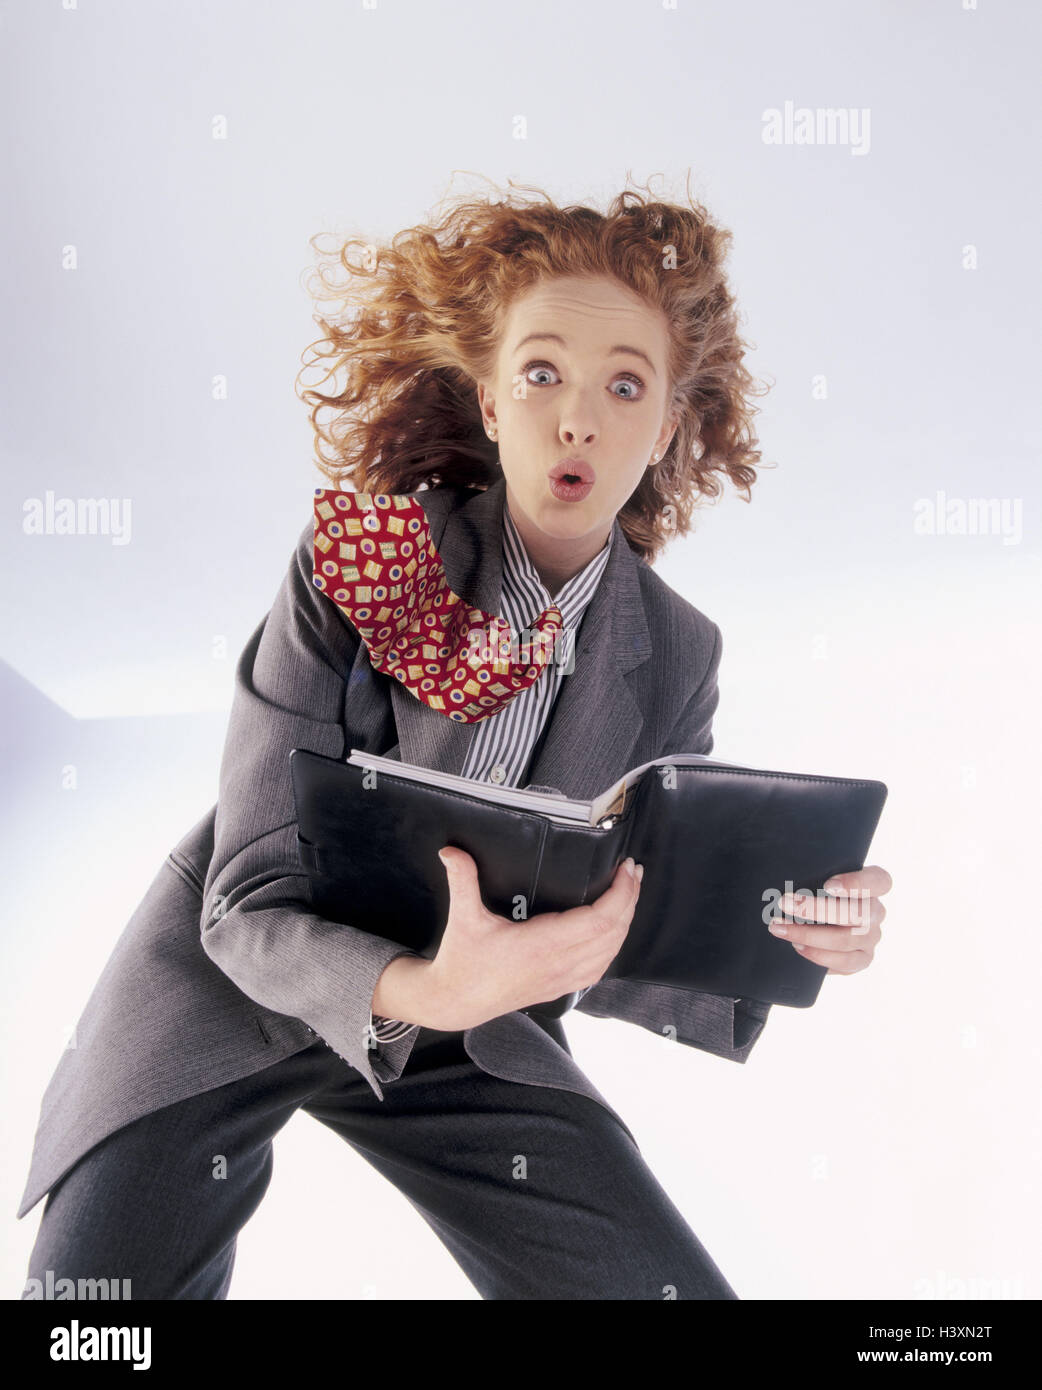 Businesswoman, dynamically, personal organizer business, dynamics, woman, suit, tie, red-haired, facial play, inside, studio Stock Photo